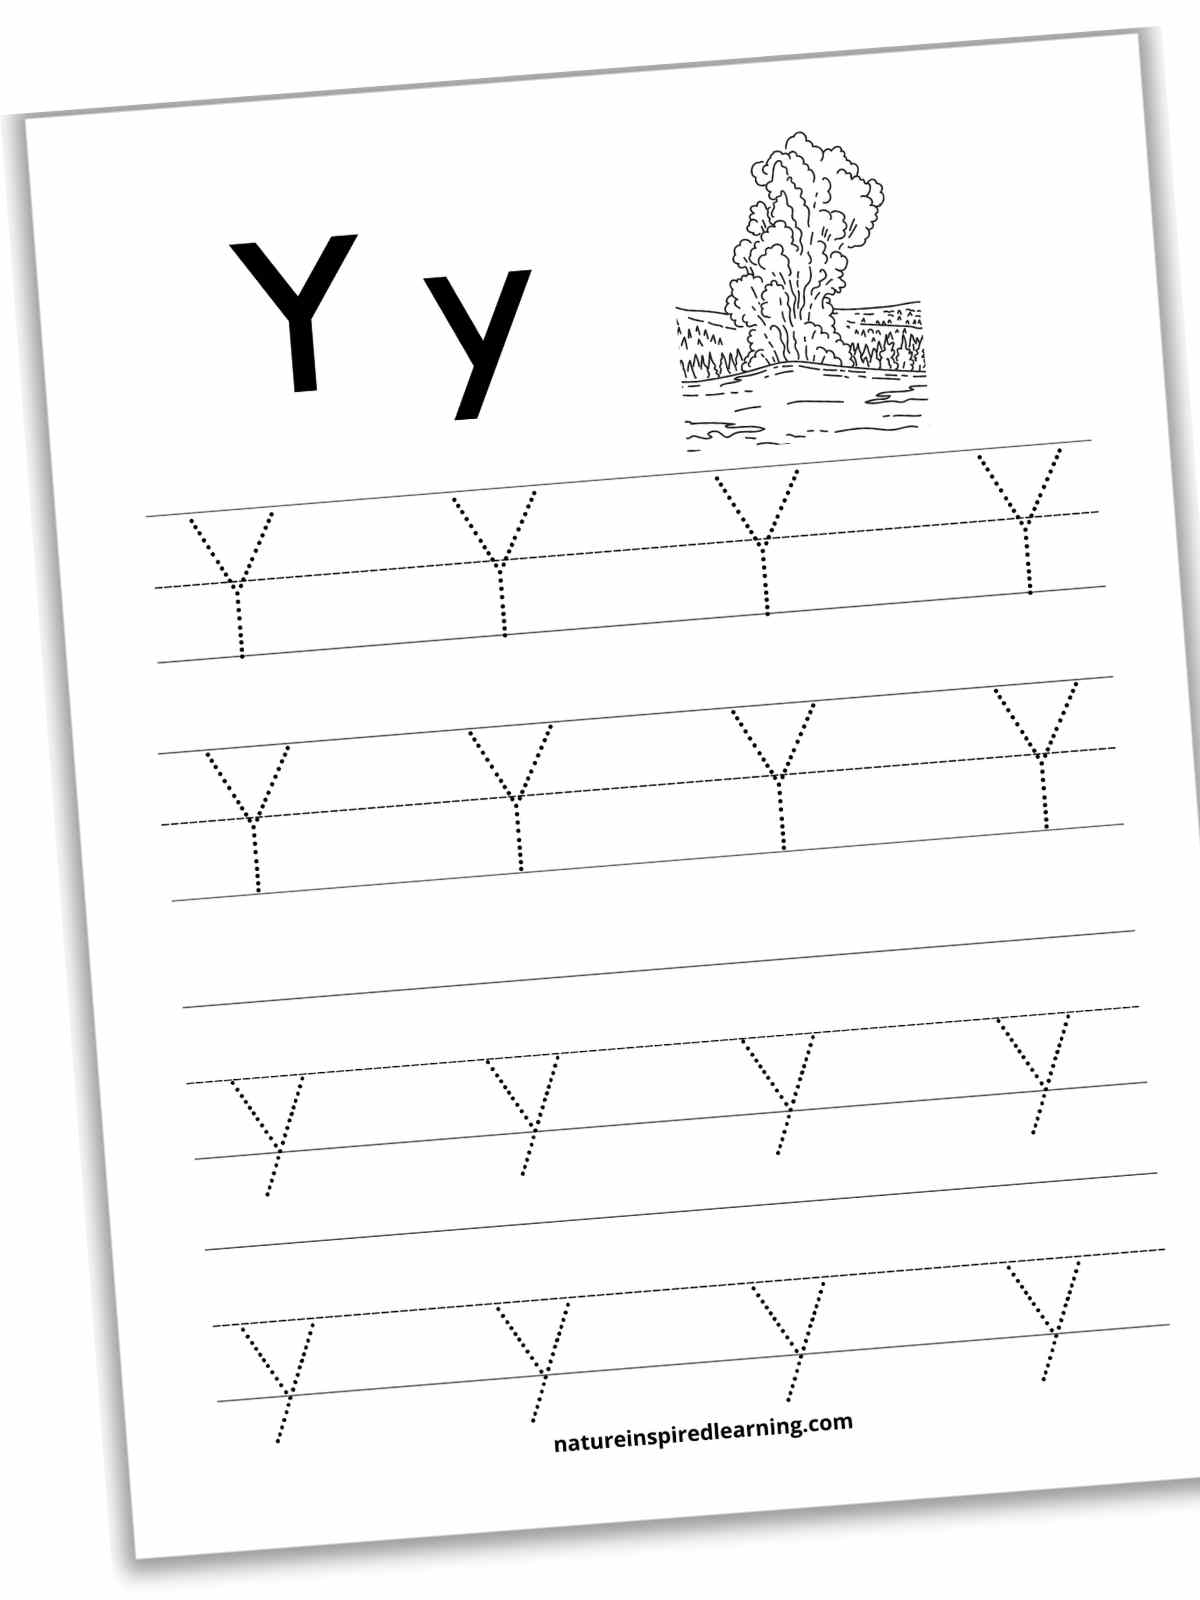 worksheet with four sets of lines, two with uppercase y's and two with lowercase y's with a Yellowstone scene at the top